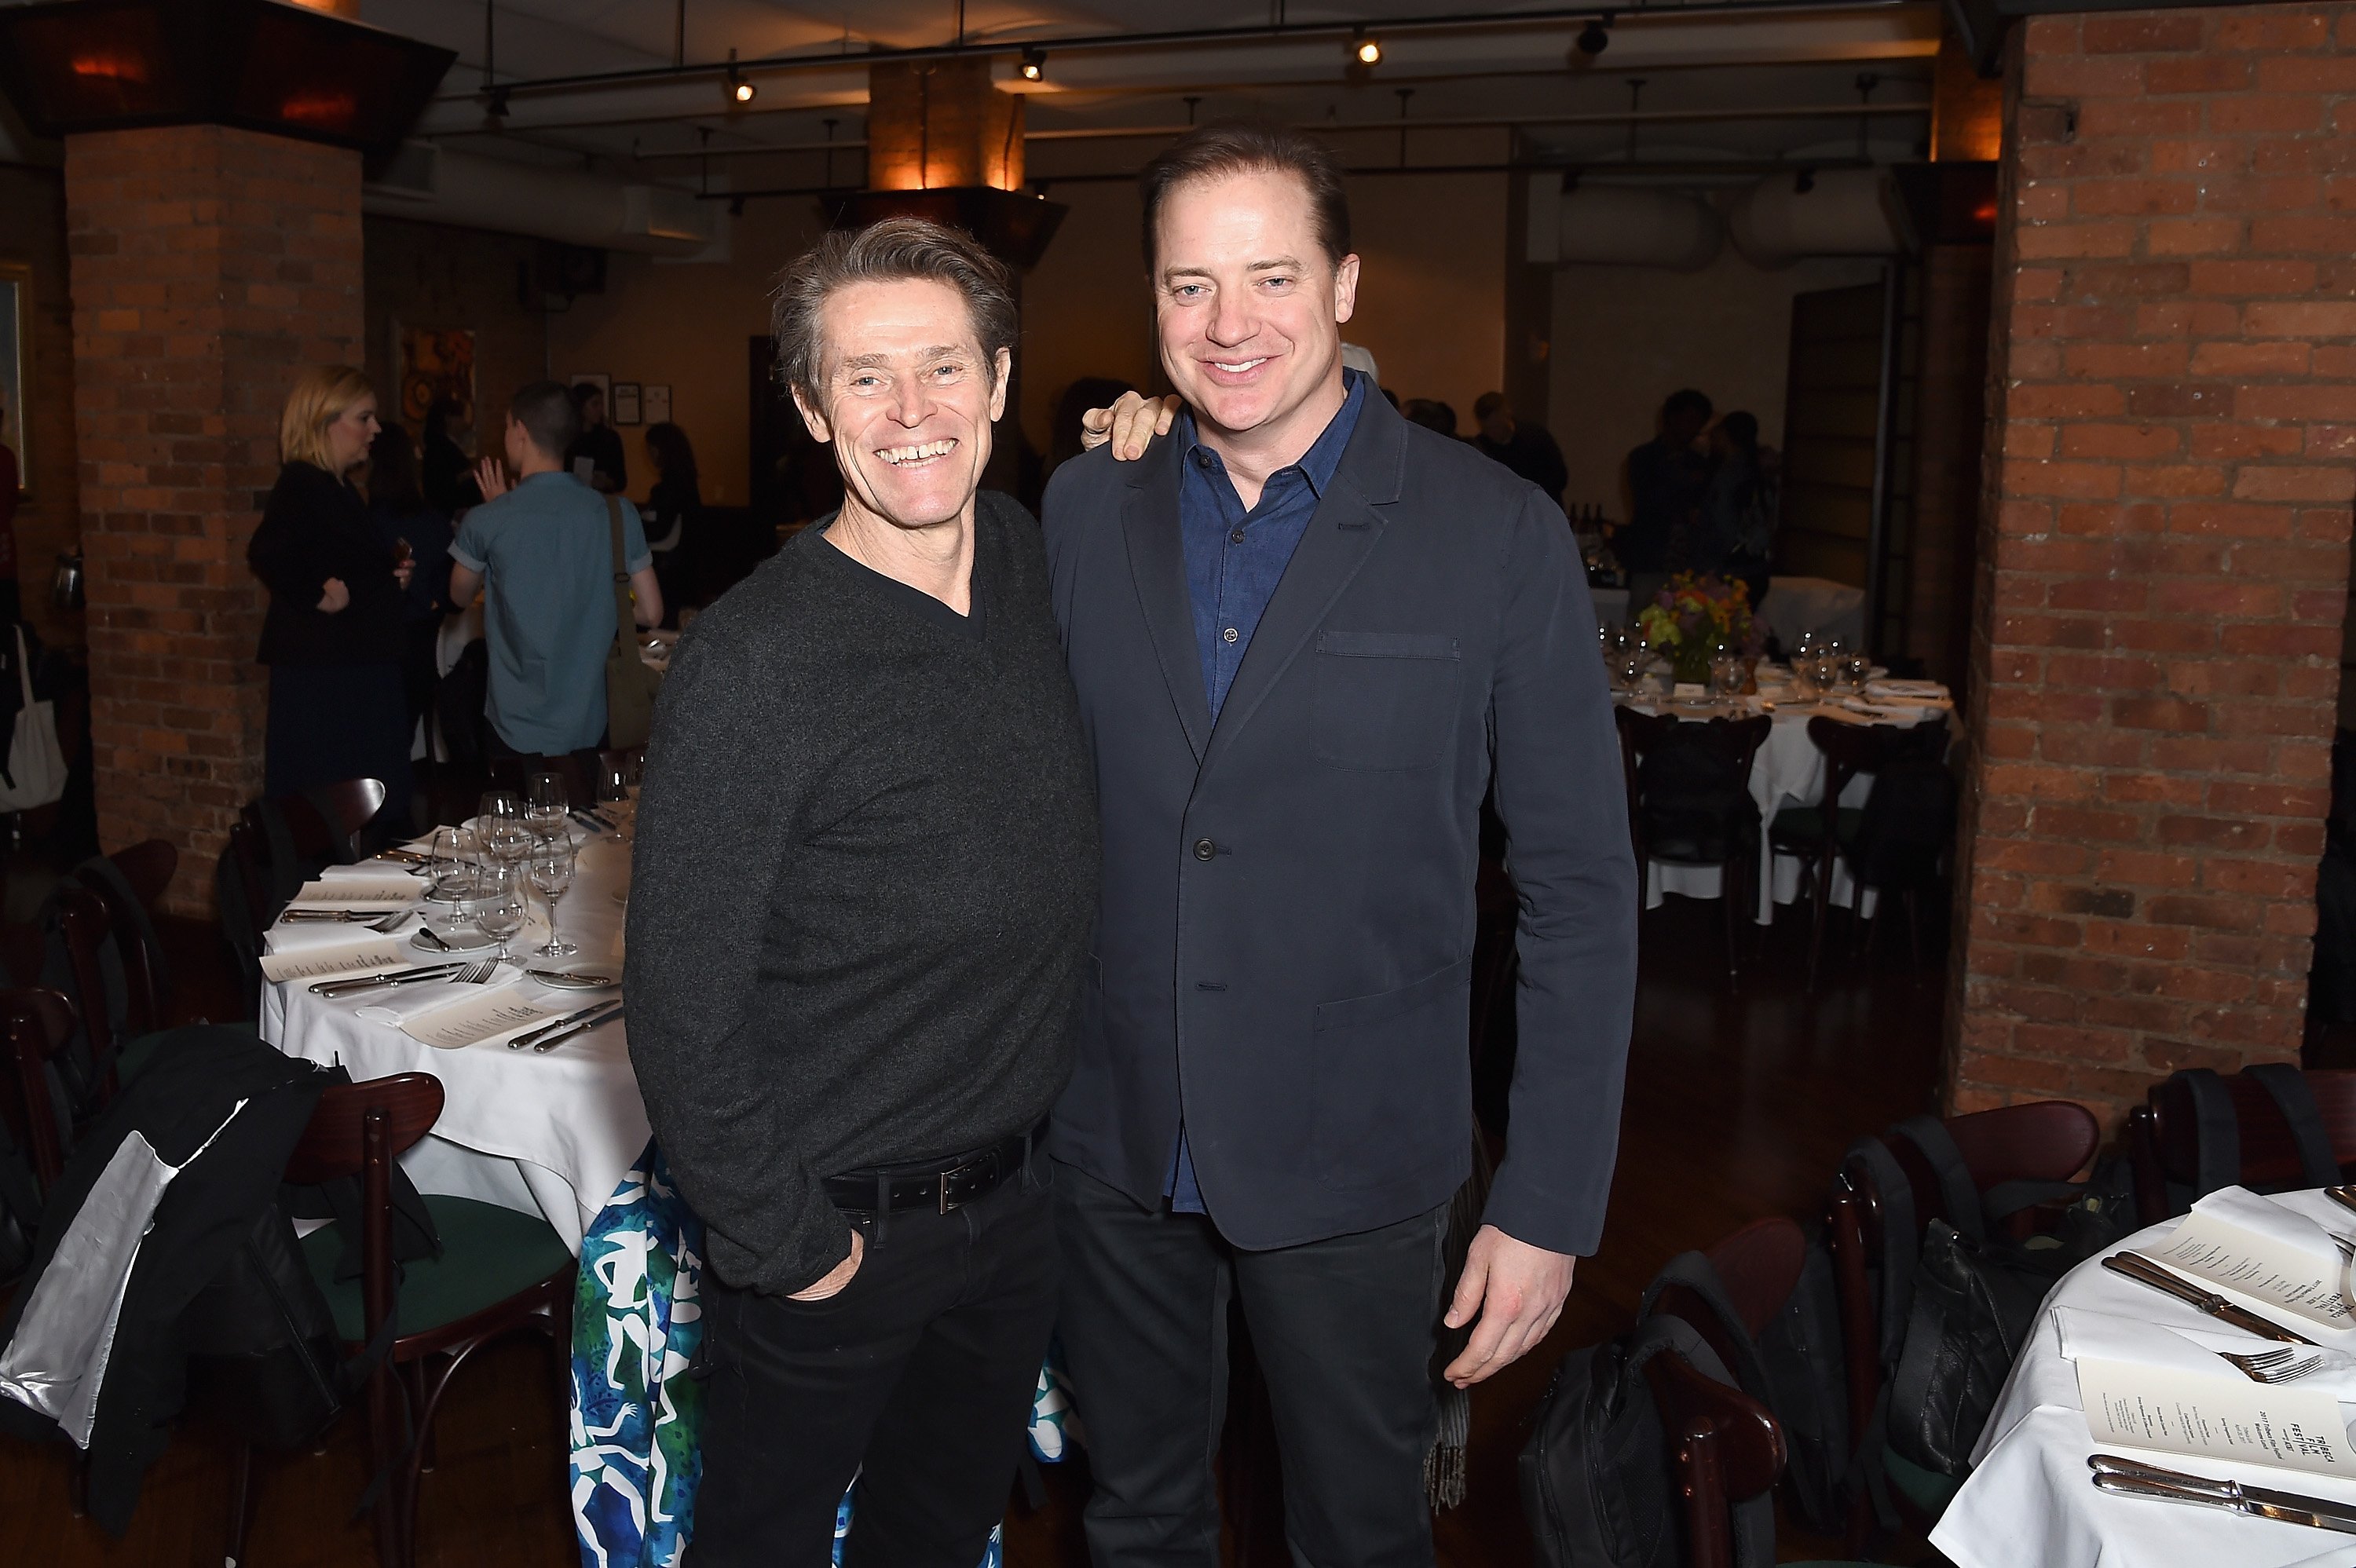 Willem Dafoe and Brendan Fraser at the jury welcome lunch at the Tribeca Film Festival on April 20, 2017, in New York City. | Source: Getty Images